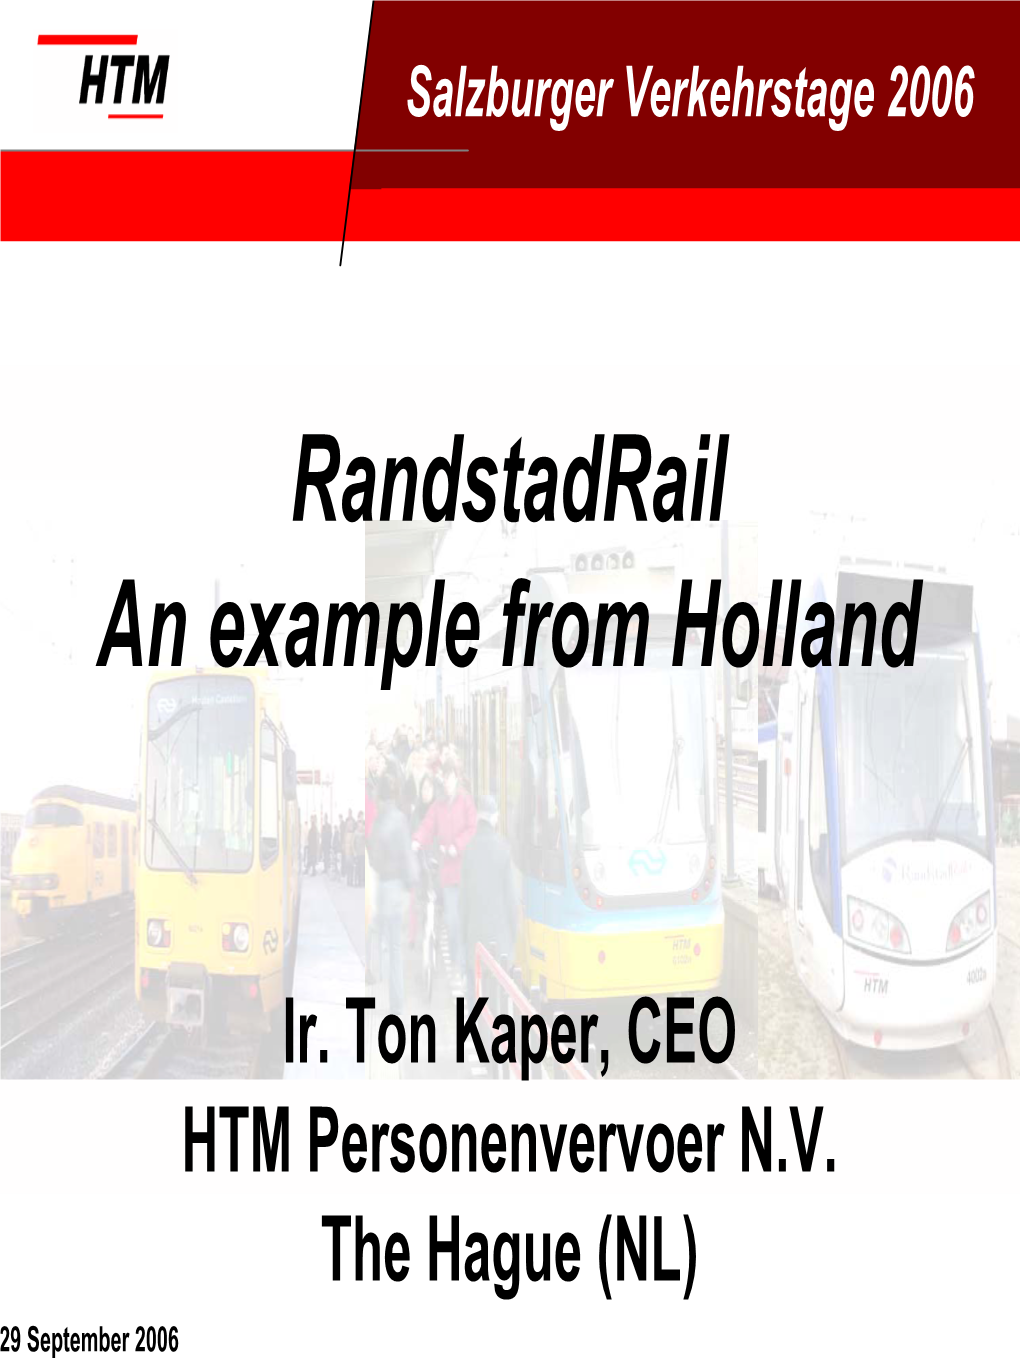 Randstadrail an Example from Holland